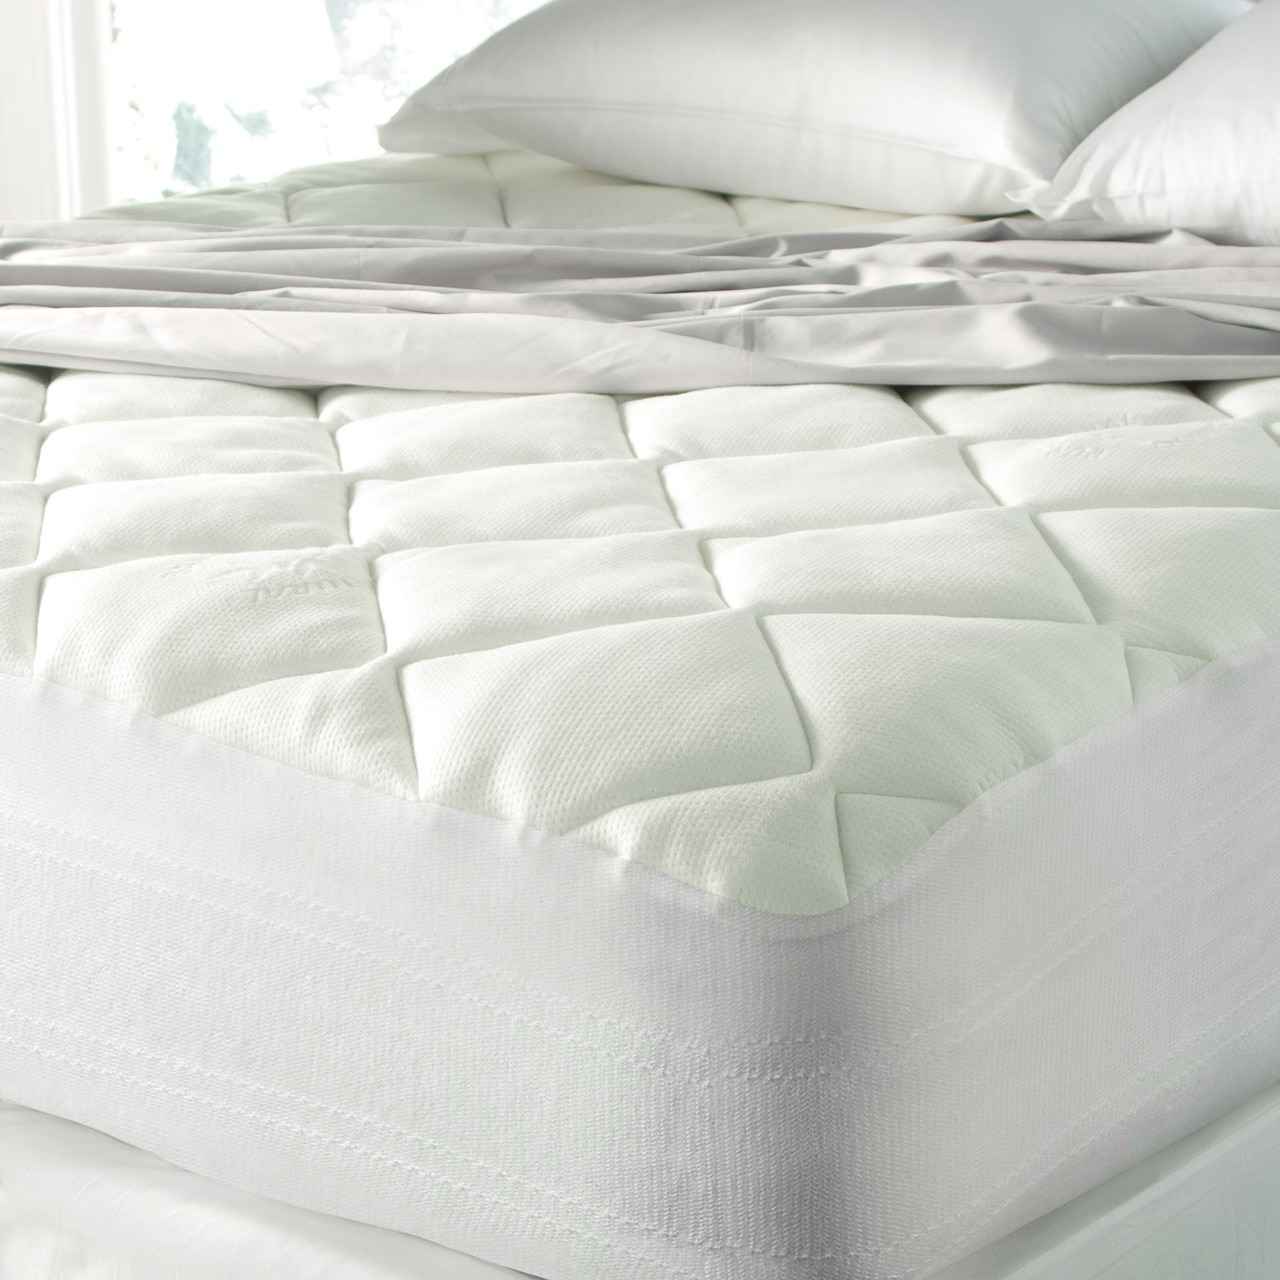 Downlite Twin XL Dorm Mattress Waterproof Protector Pad and Cover